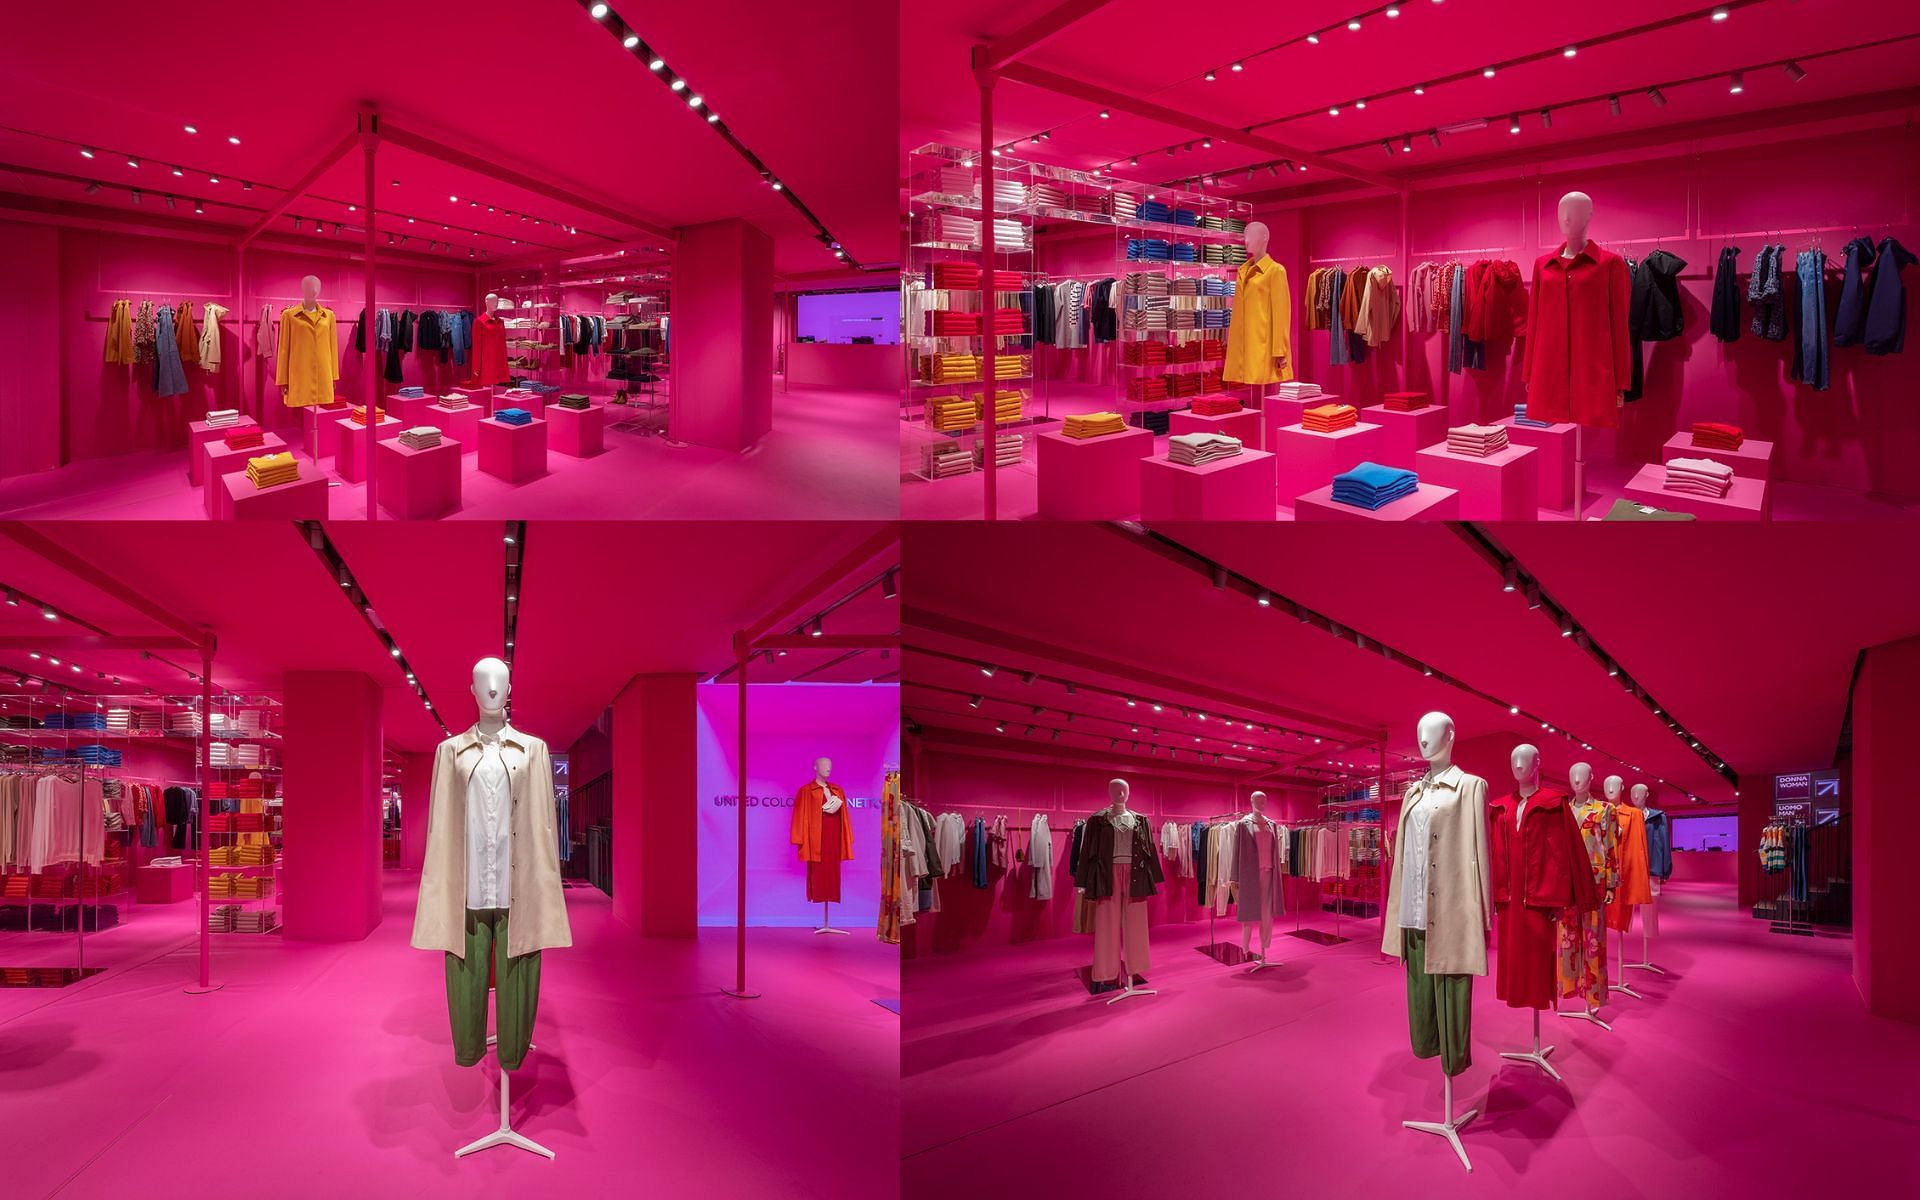 Benetton digital retail project: 5 things to know